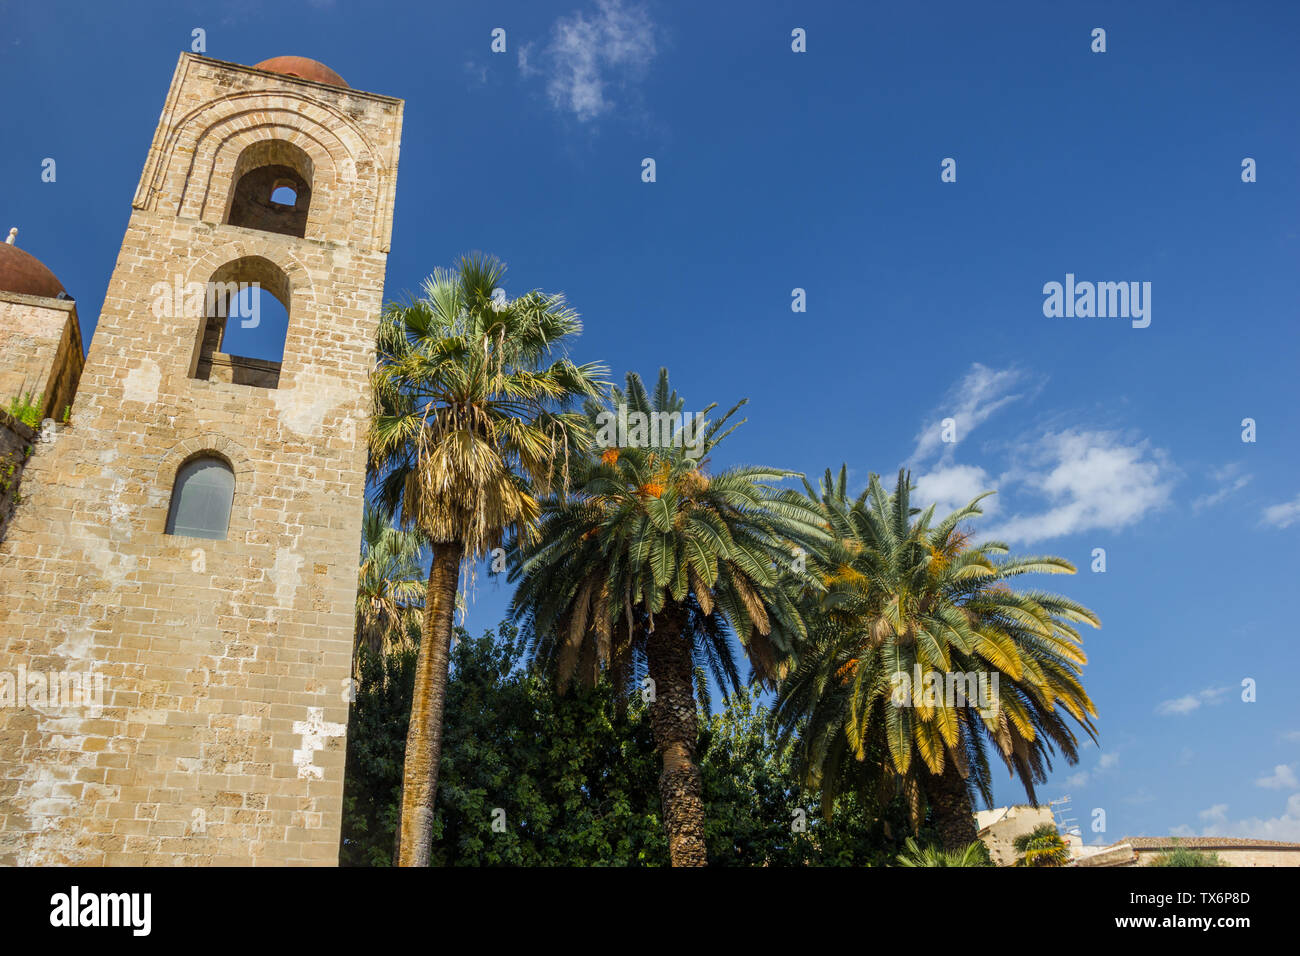 Palermo Sicily famous arabic bell tower of church San Giovanni degli Eremiti, historical heritage with bell tower and palms Stock Photo